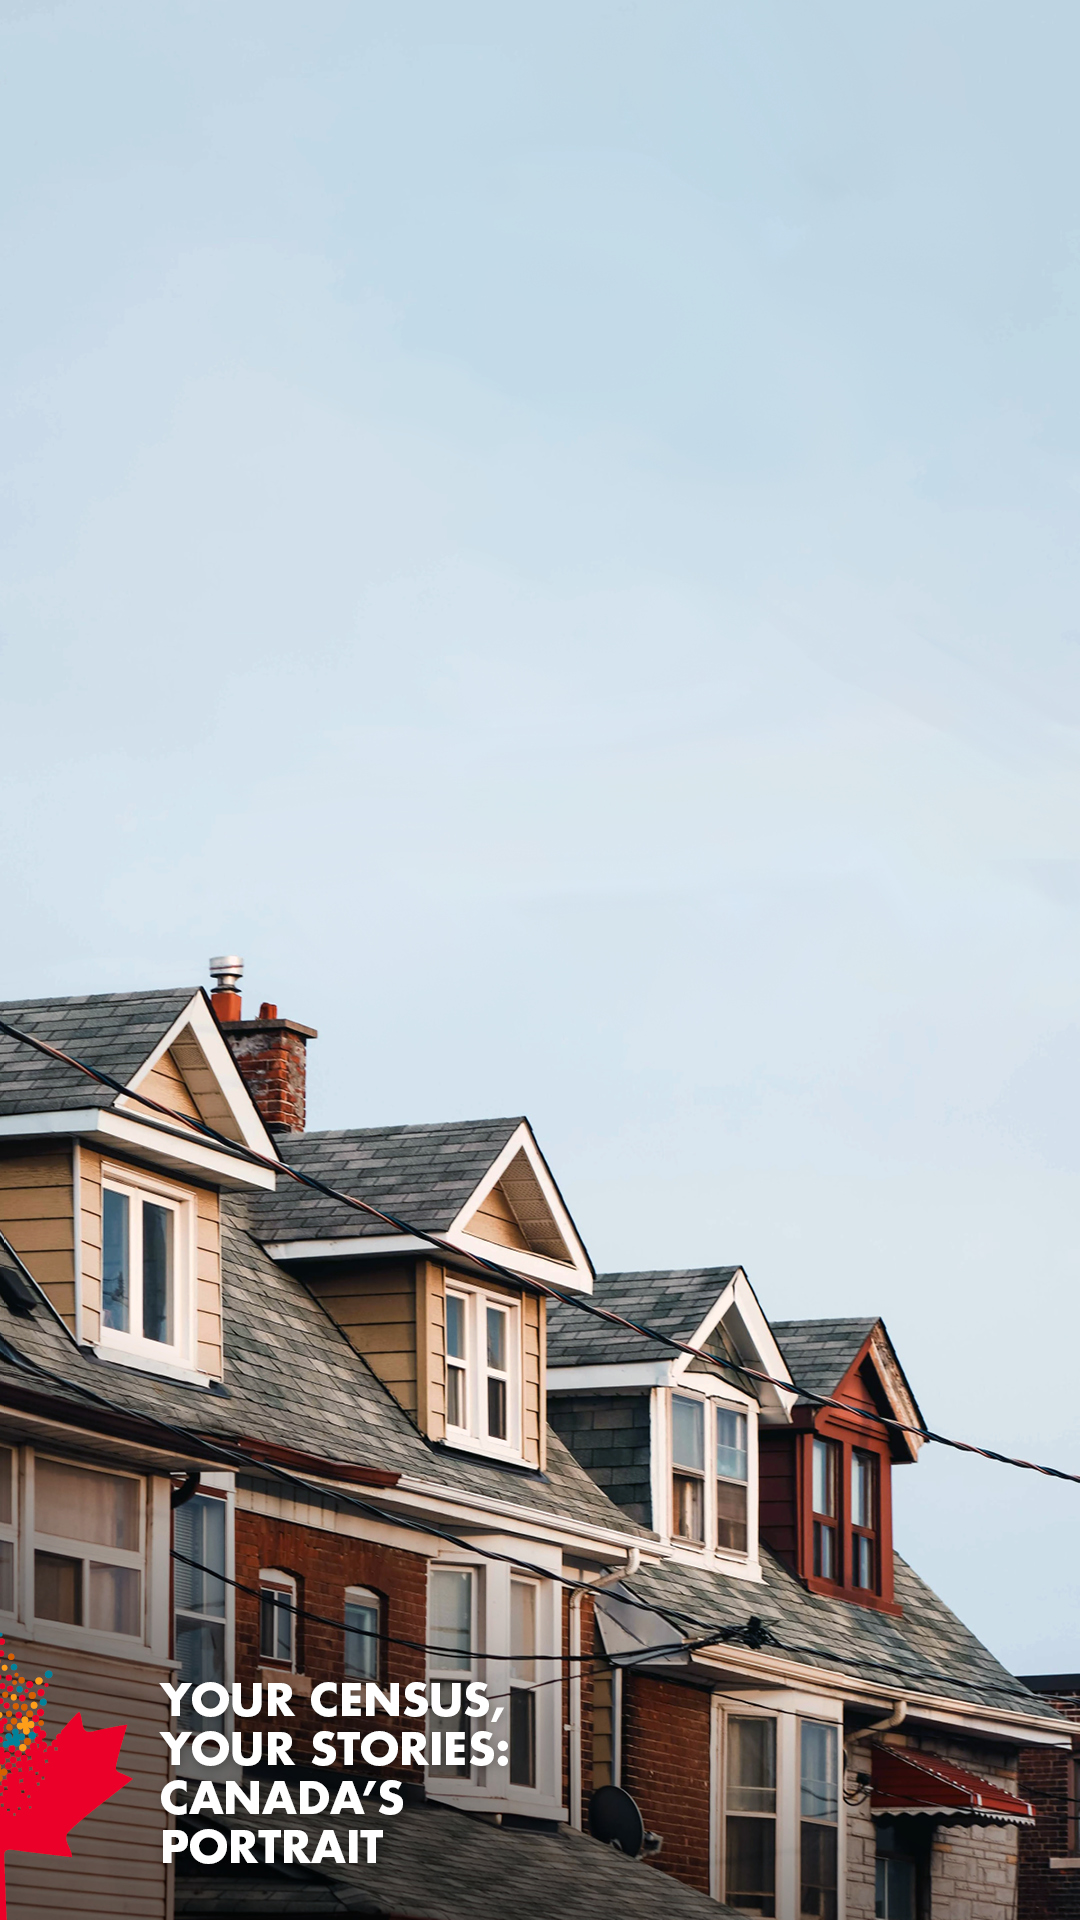 Post 4 image - Rooftops of houses under a blue sky with the text "Your Census, your stories: Canada's portrait"